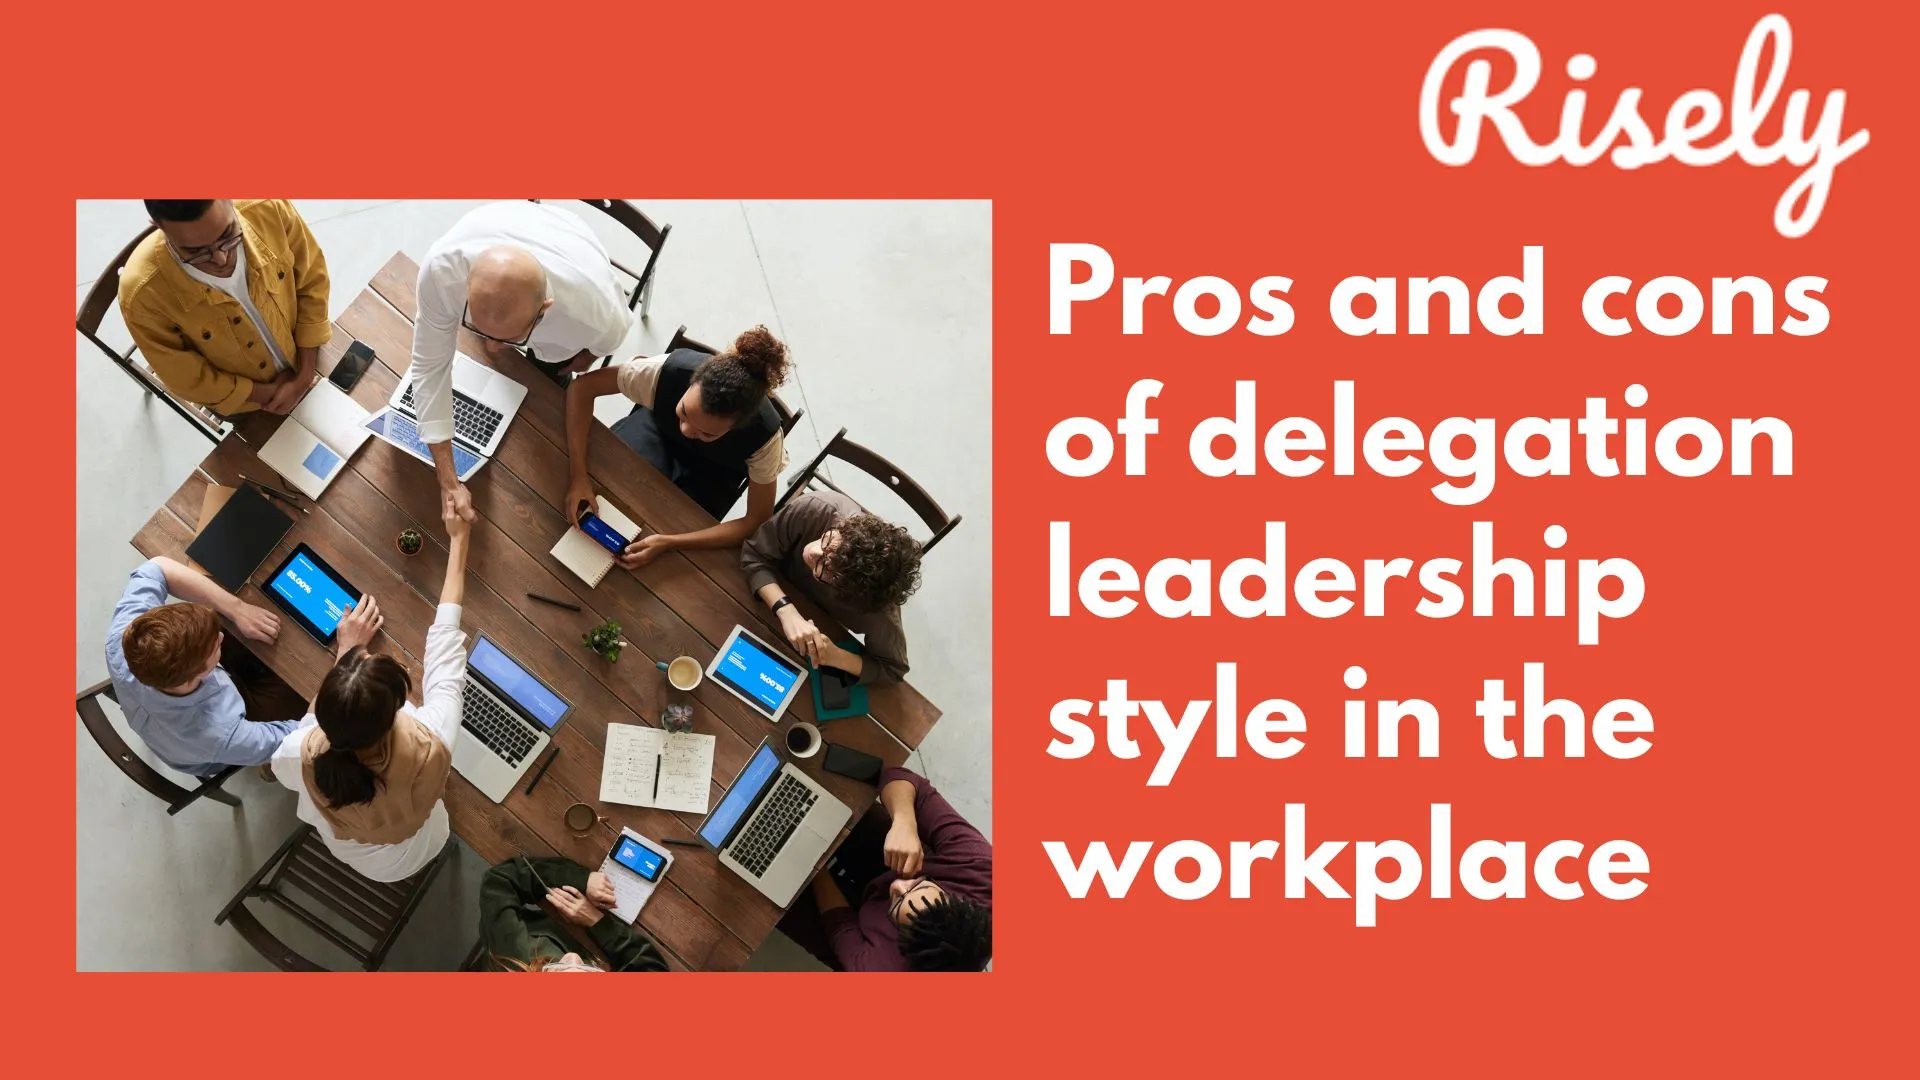 Pros and cons of delegation leadership style in the workplace